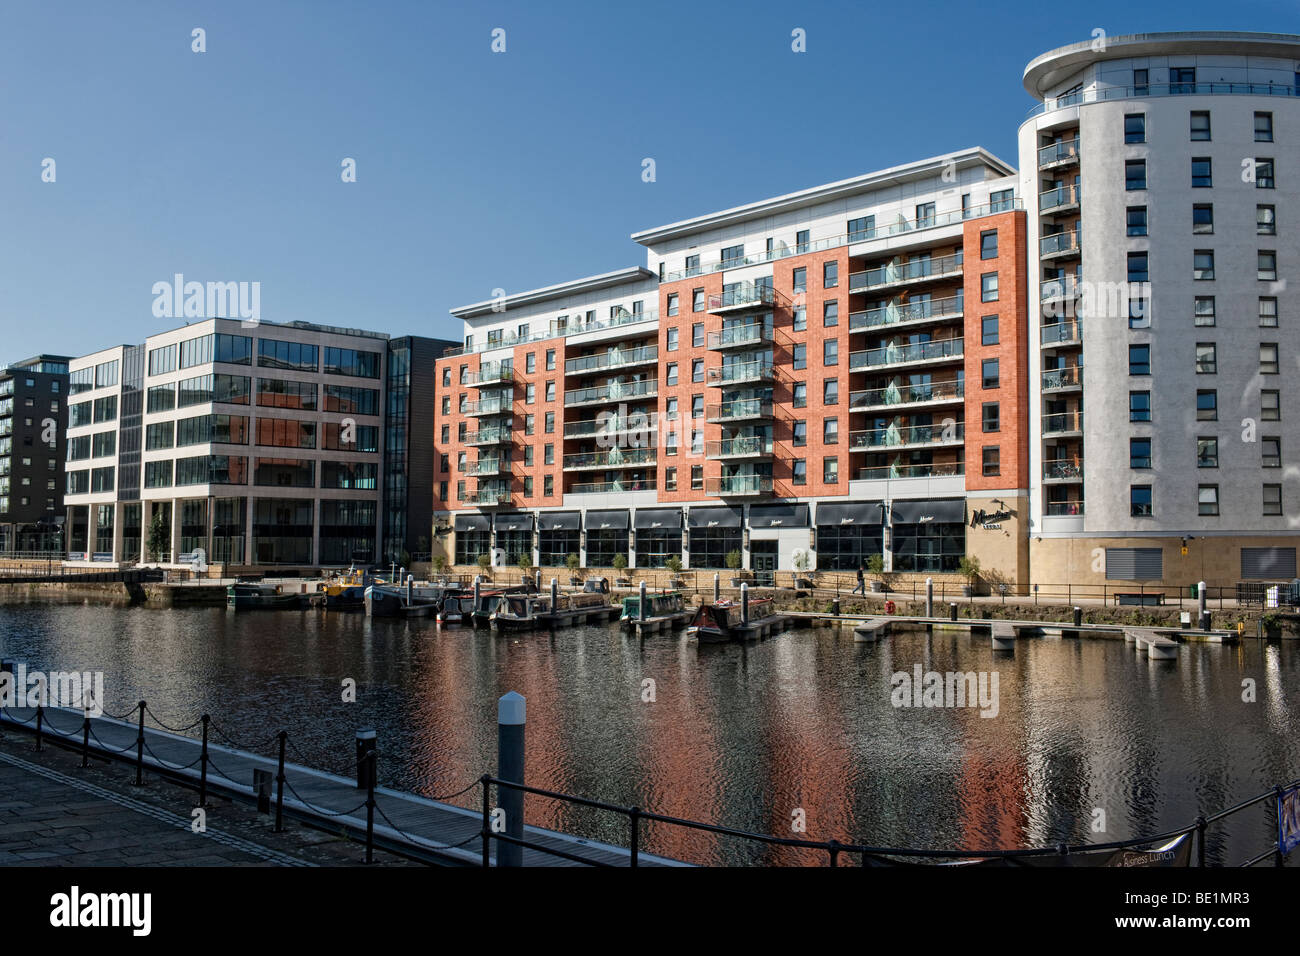 Clarence Dock, Leeds, West Yorkshire Regno Unito Foto Stock